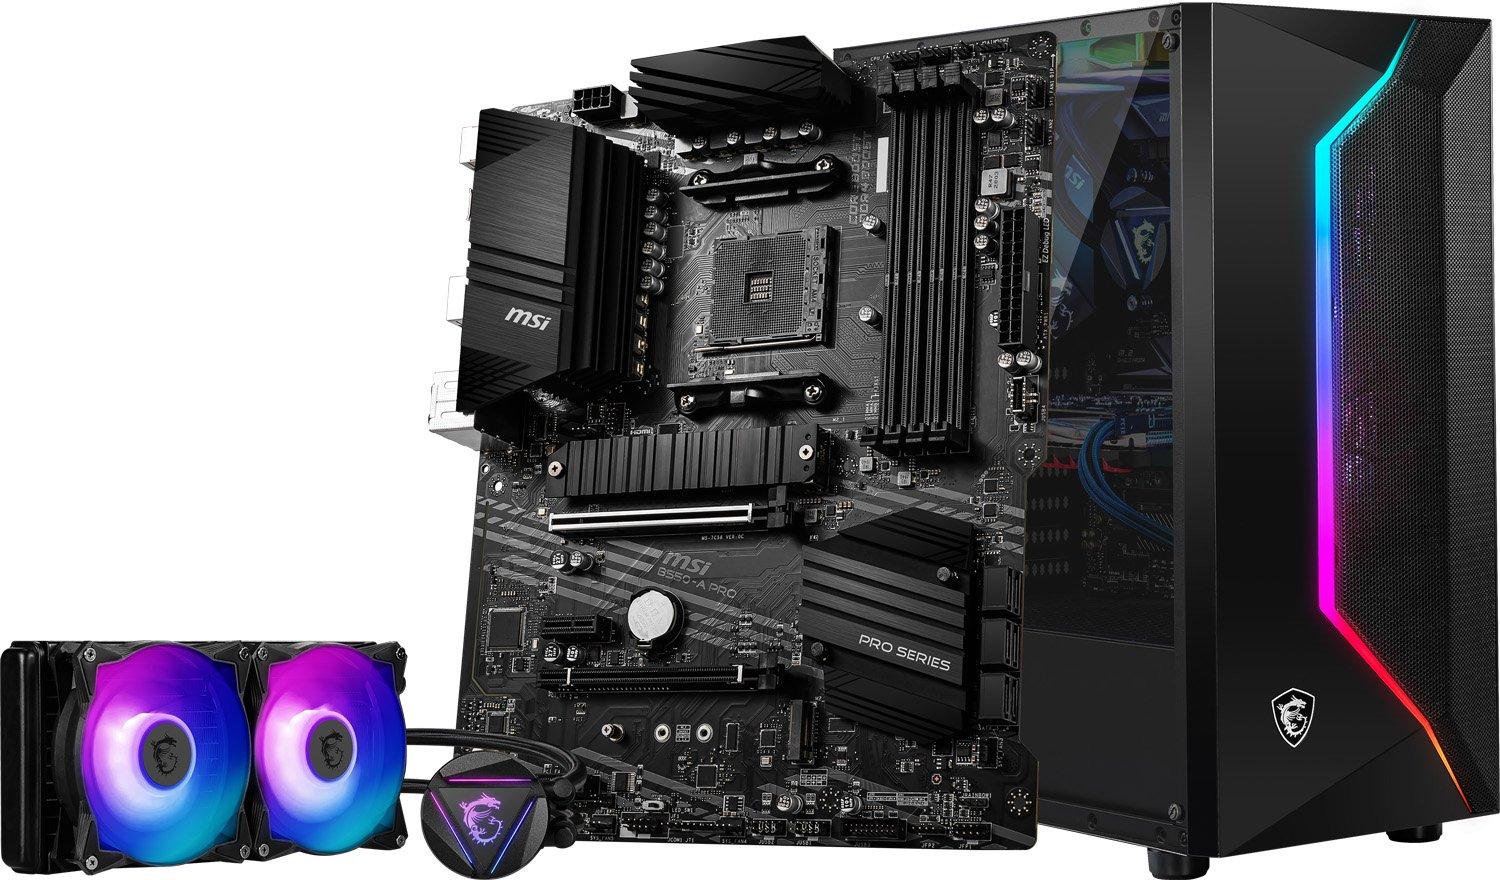 A first look at MSI B550 motherboards